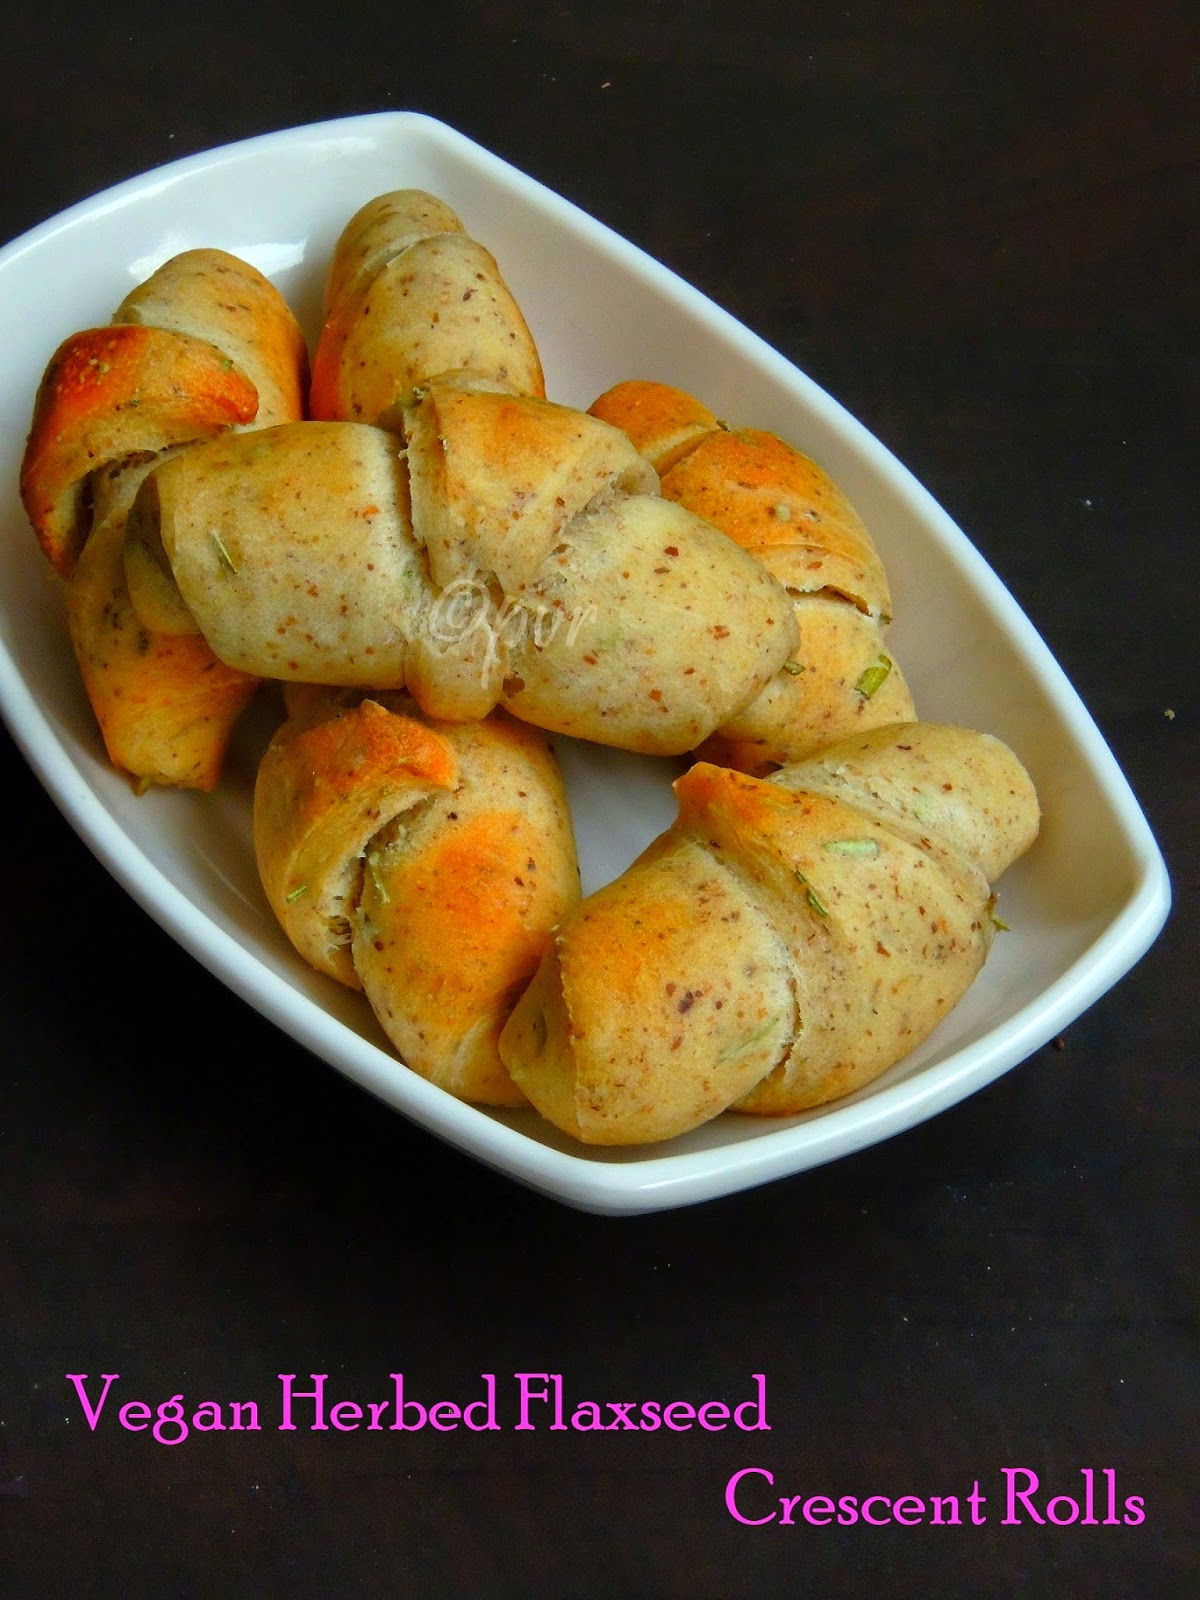 Herbed flaxseed crescent dinner rolls